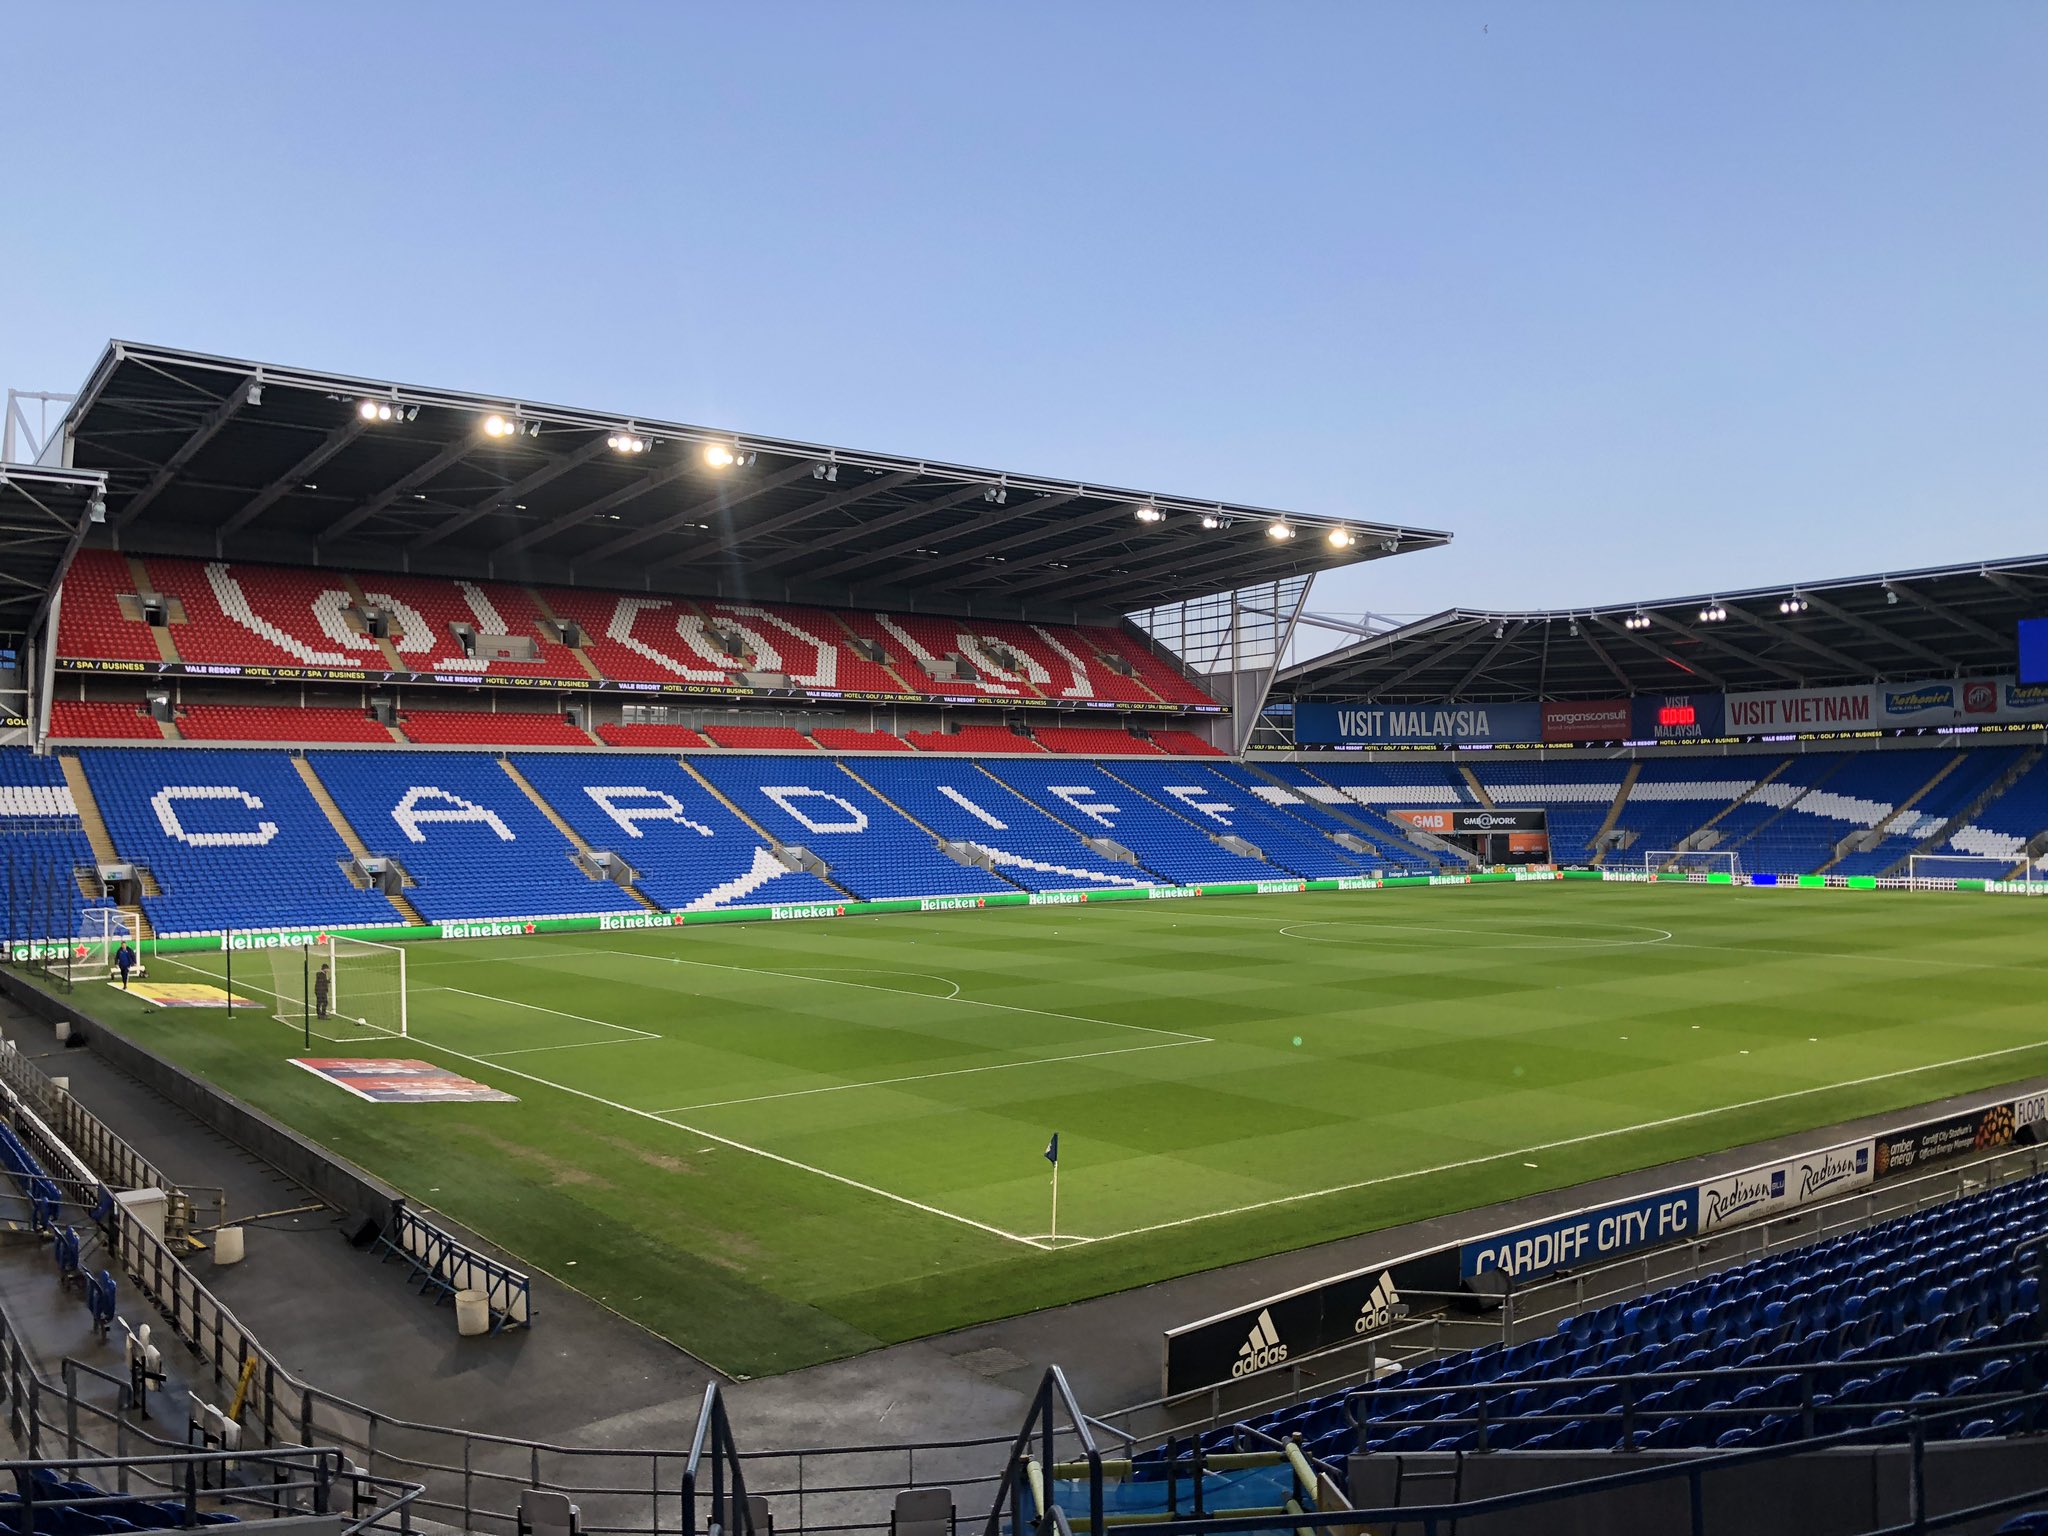 Cardiff City FC on X: Wrap up warm this afternoon, #Bluebirds